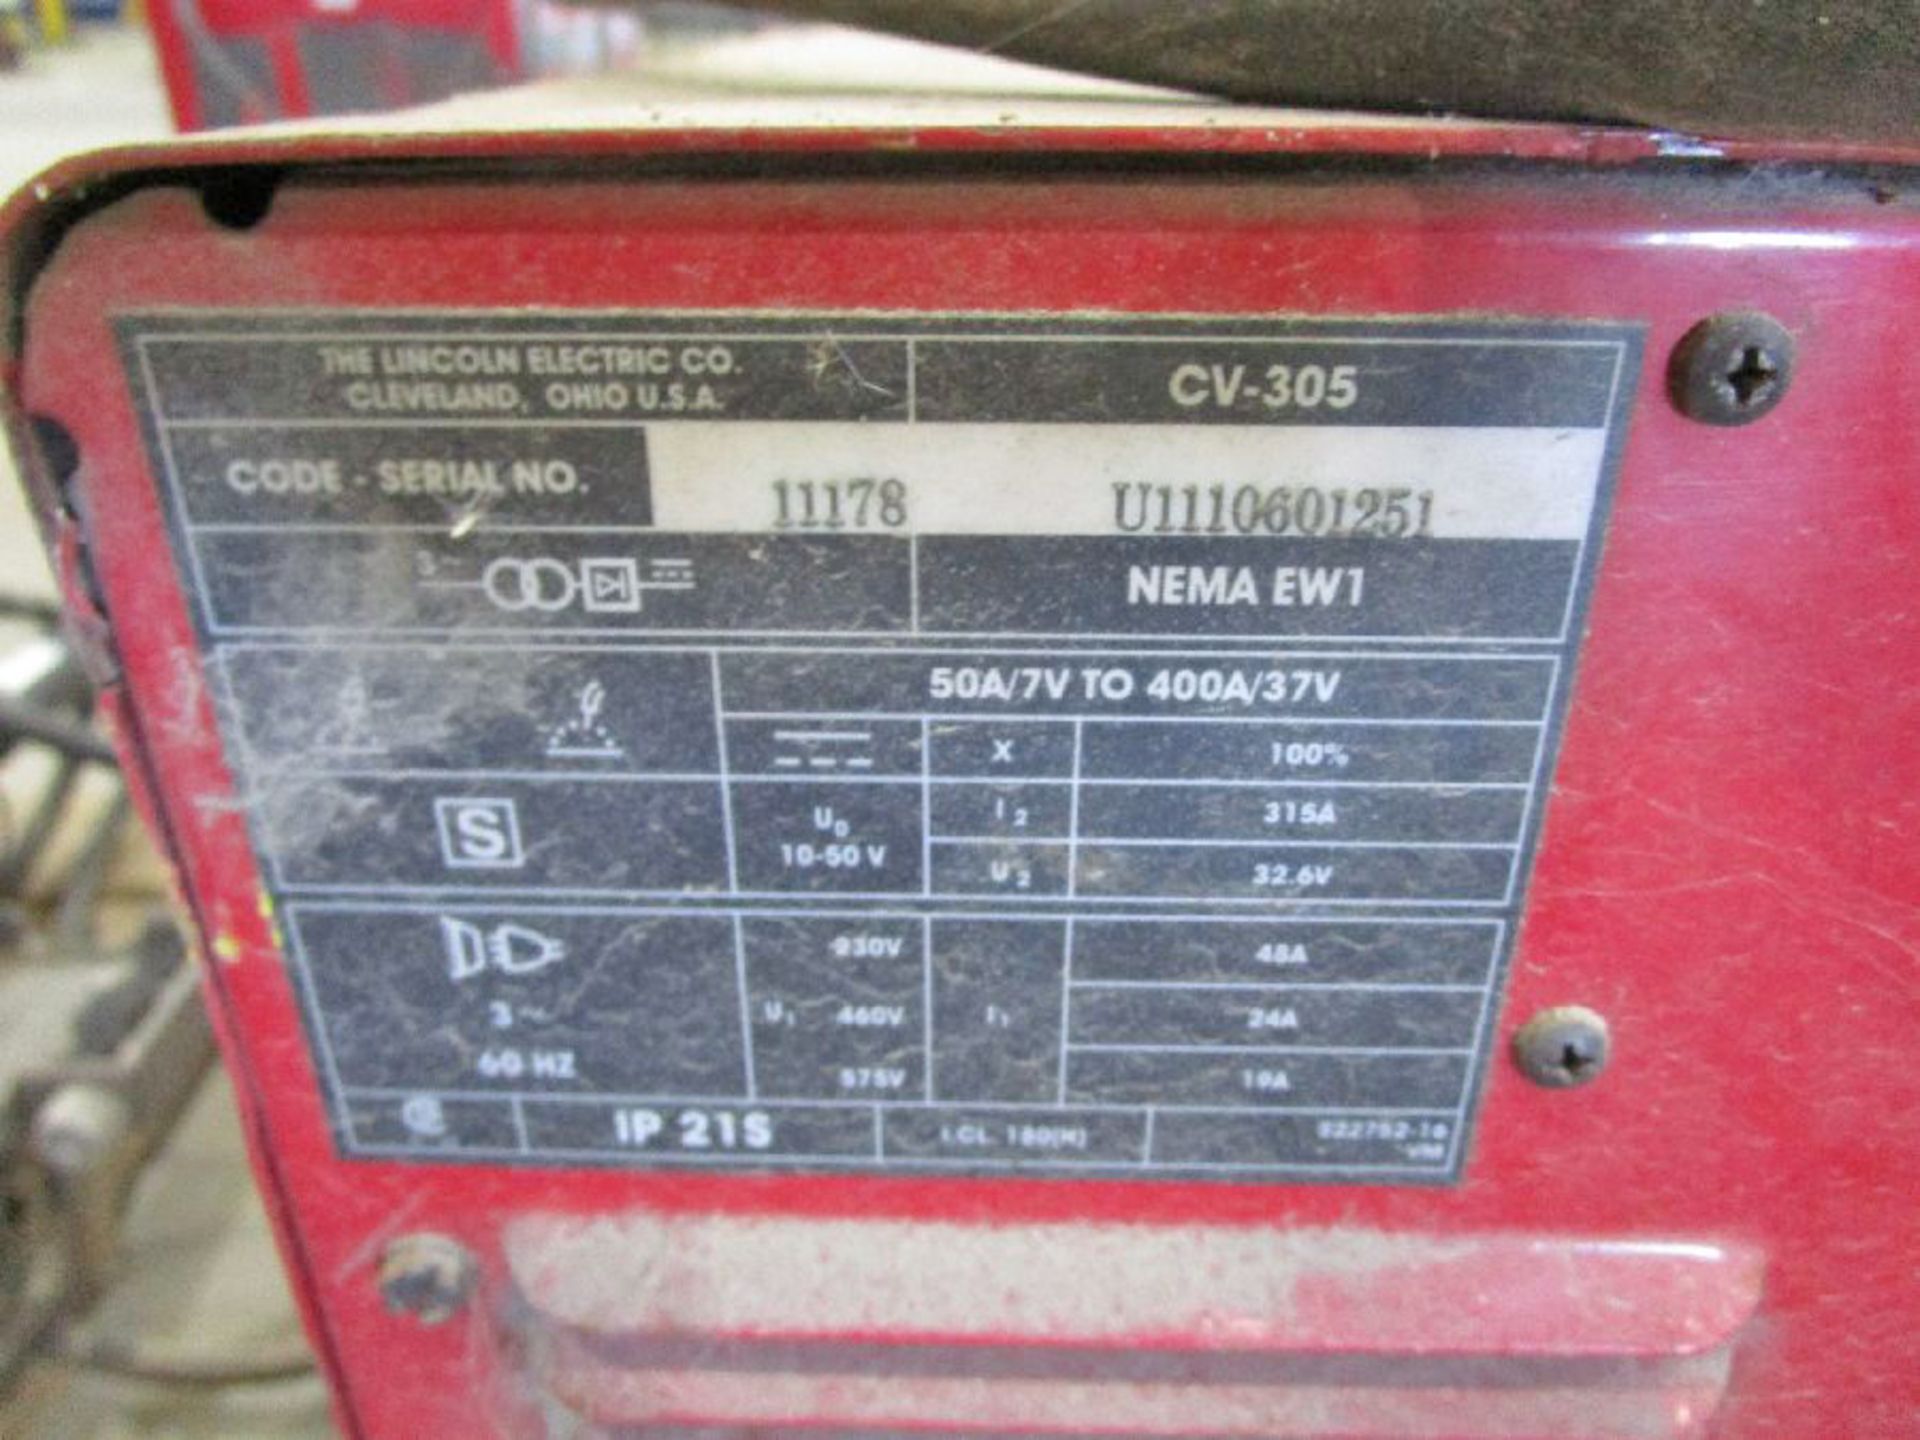 Lincoln Electric Model CV - 305 Mig Welding Power Source - Image 5 of 12